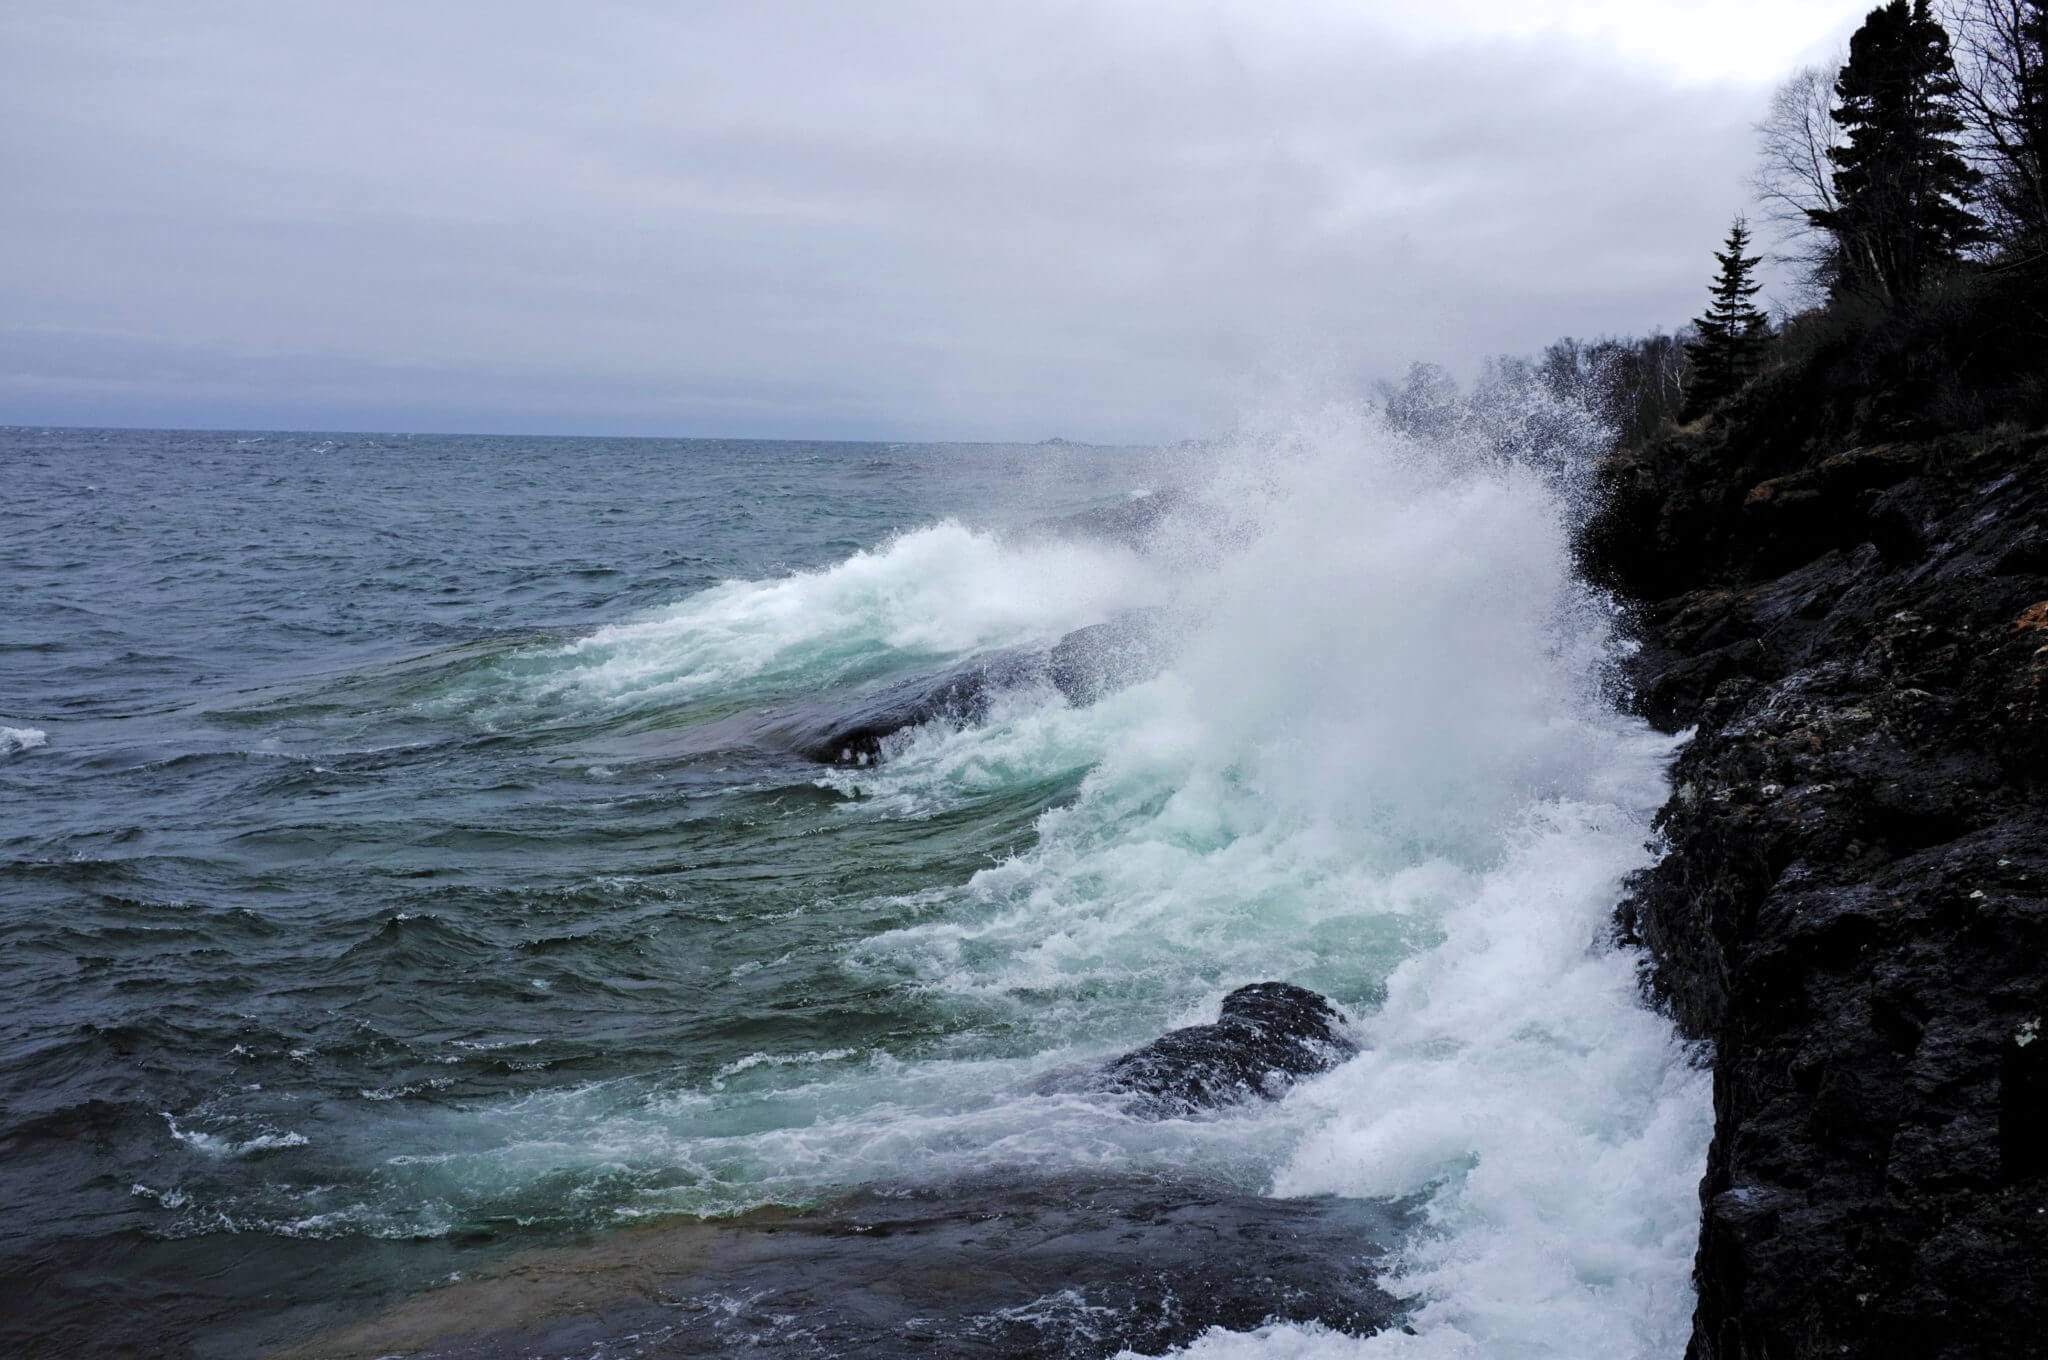 Waves crashing near mouth of the Temperance river